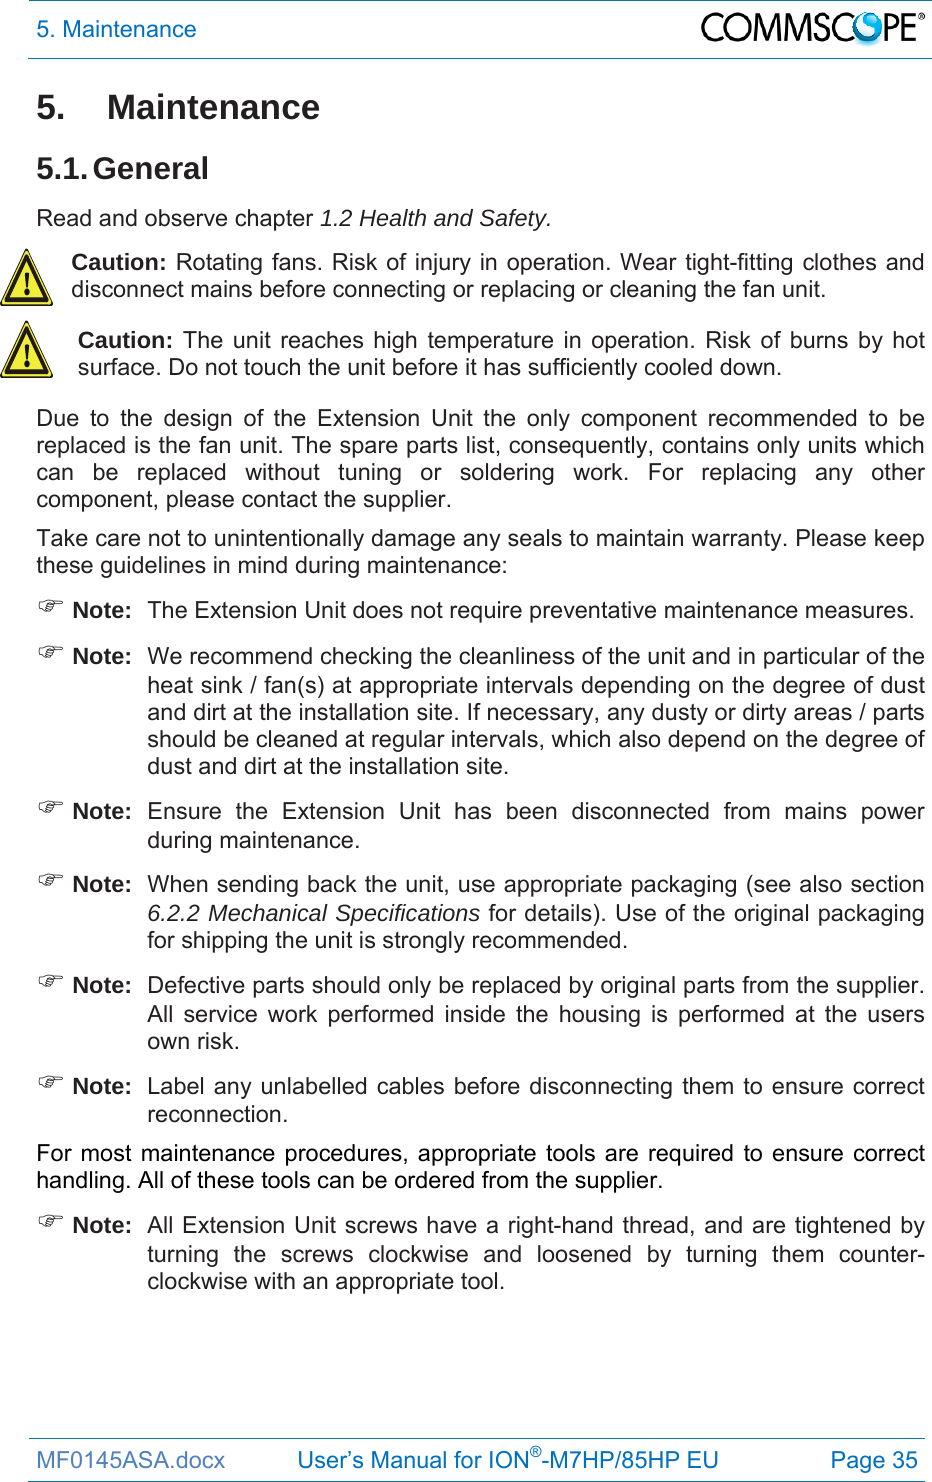 5. Maintenance  MF0145ASA.docx           User’s Manual for ION®-M7HP/85HP EU  Page 35 5. Maintenance 5.1. General Read and observe chapter 1.2 Health and Safety. Caution: Rotating fans. Risk of injury in operation. Wear tight-fitting clothes and disconnect mains before connecting or replacing or cleaning the fan unit. Caution: The unit reaches high temperature in operation. Risk of burns by hot surface. Do not touch the unit before it has sufficiently cooled down. Due to the design of the Extension Unit the only component recommended to be replaced is the fan unit. The spare parts list, consequently, contains only units which can be replaced without tuning or soldering work. For replacing any other component, please contact the supplier.  Take care not to unintentionally damage any seals to maintain warranty. Please keep these guidelines in mind during maintenance:  Note:  The Extension Unit does not require preventative maintenance measures.  Note:  We recommend checking the cleanliness of the unit and in particular of the heat sink / fan(s) at appropriate intervals depending on the degree of dust and dirt at the installation site. If necessary, any dusty or dirty areas / parts should be cleaned at regular intervals, which also depend on the degree of dust and dirt at the installation site.  Note:  Ensure the Extension Unit has been disconnected from mains power during maintenance.  Note:  When sending back the unit, use appropriate packaging (see also section 6.2.2 Mechanical Specifications for details). Use of the original packaging for shipping the unit is strongly recommended.  Note:  Defective parts should only be replaced by original parts from the supplier. All service work performed inside the housing is performed at the users own risk.  Note:  Label any unlabelled cables before disconnecting them to ensure correct reconnection. For most maintenance procedures, appropriate tools are required to ensure correct handling. All of these tools can be ordered from the supplier.   Note:  All Extension Unit screws have a right-hand thread, and are tightened by turning the screws clockwise and loosened by turning them counter-clockwise with an appropriate tool.    